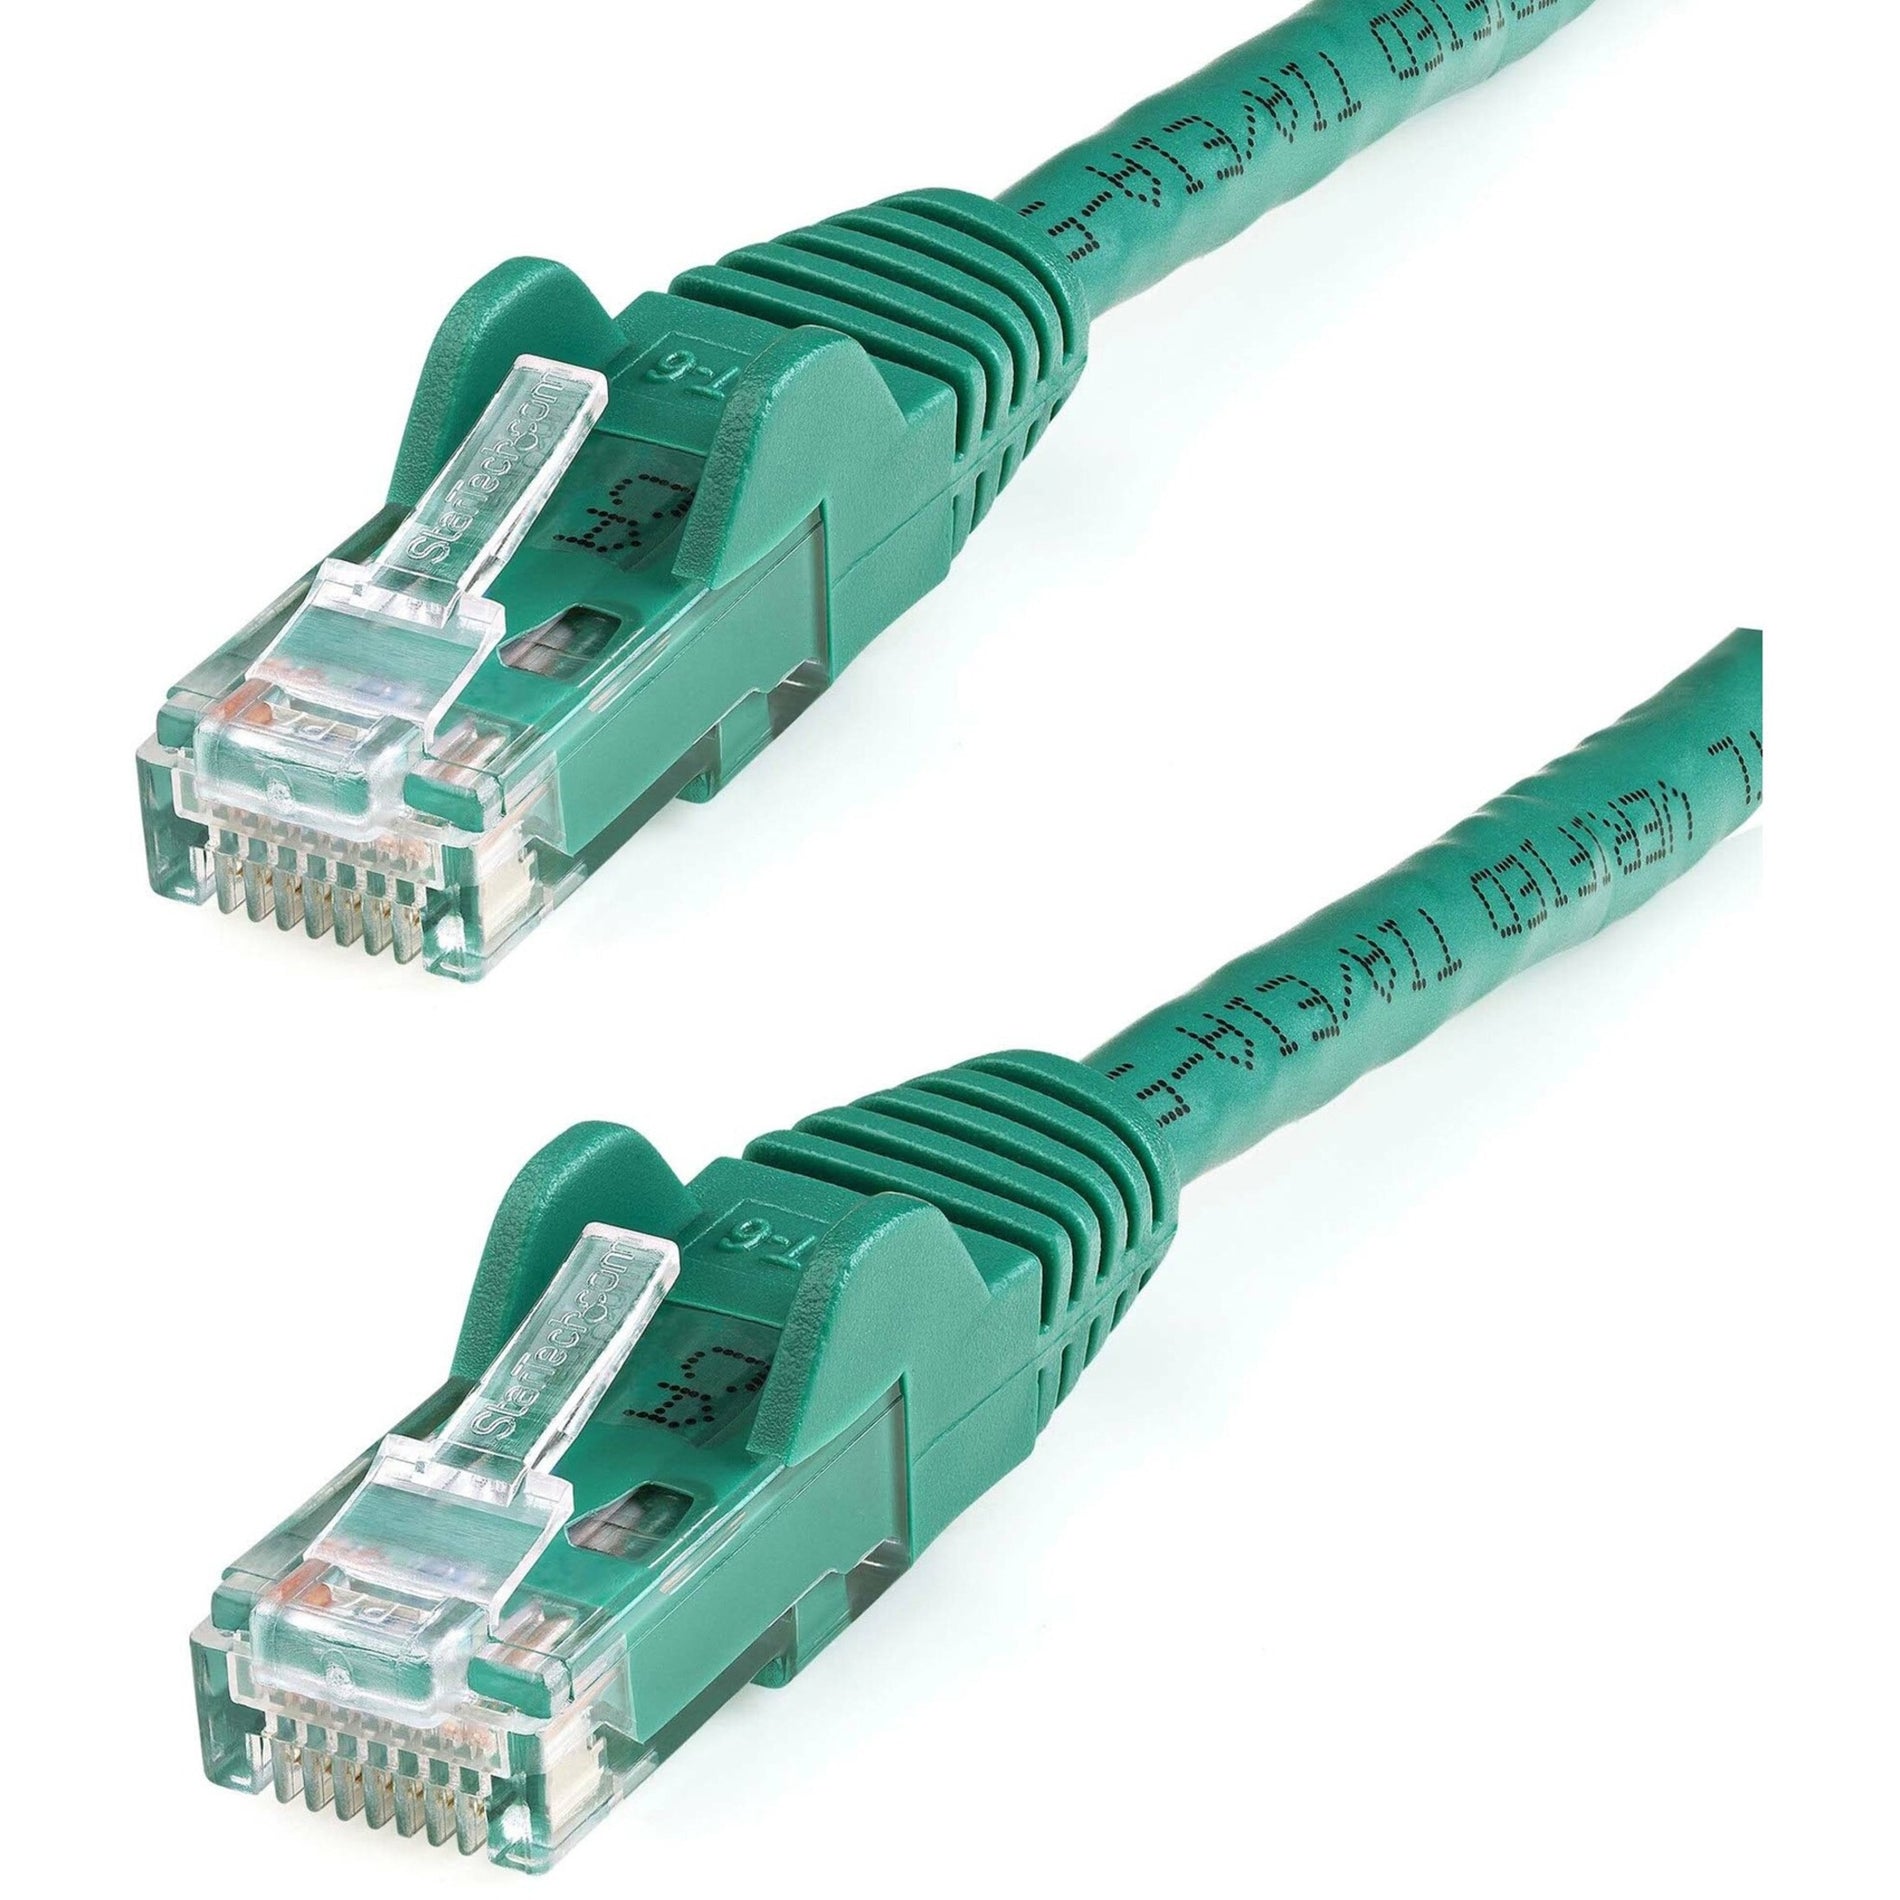 StarTech.com N6PATCH150GN Cat6 Patch Cable, 150ft Green Ethernet Cable, Snagless RJ45 Connectors